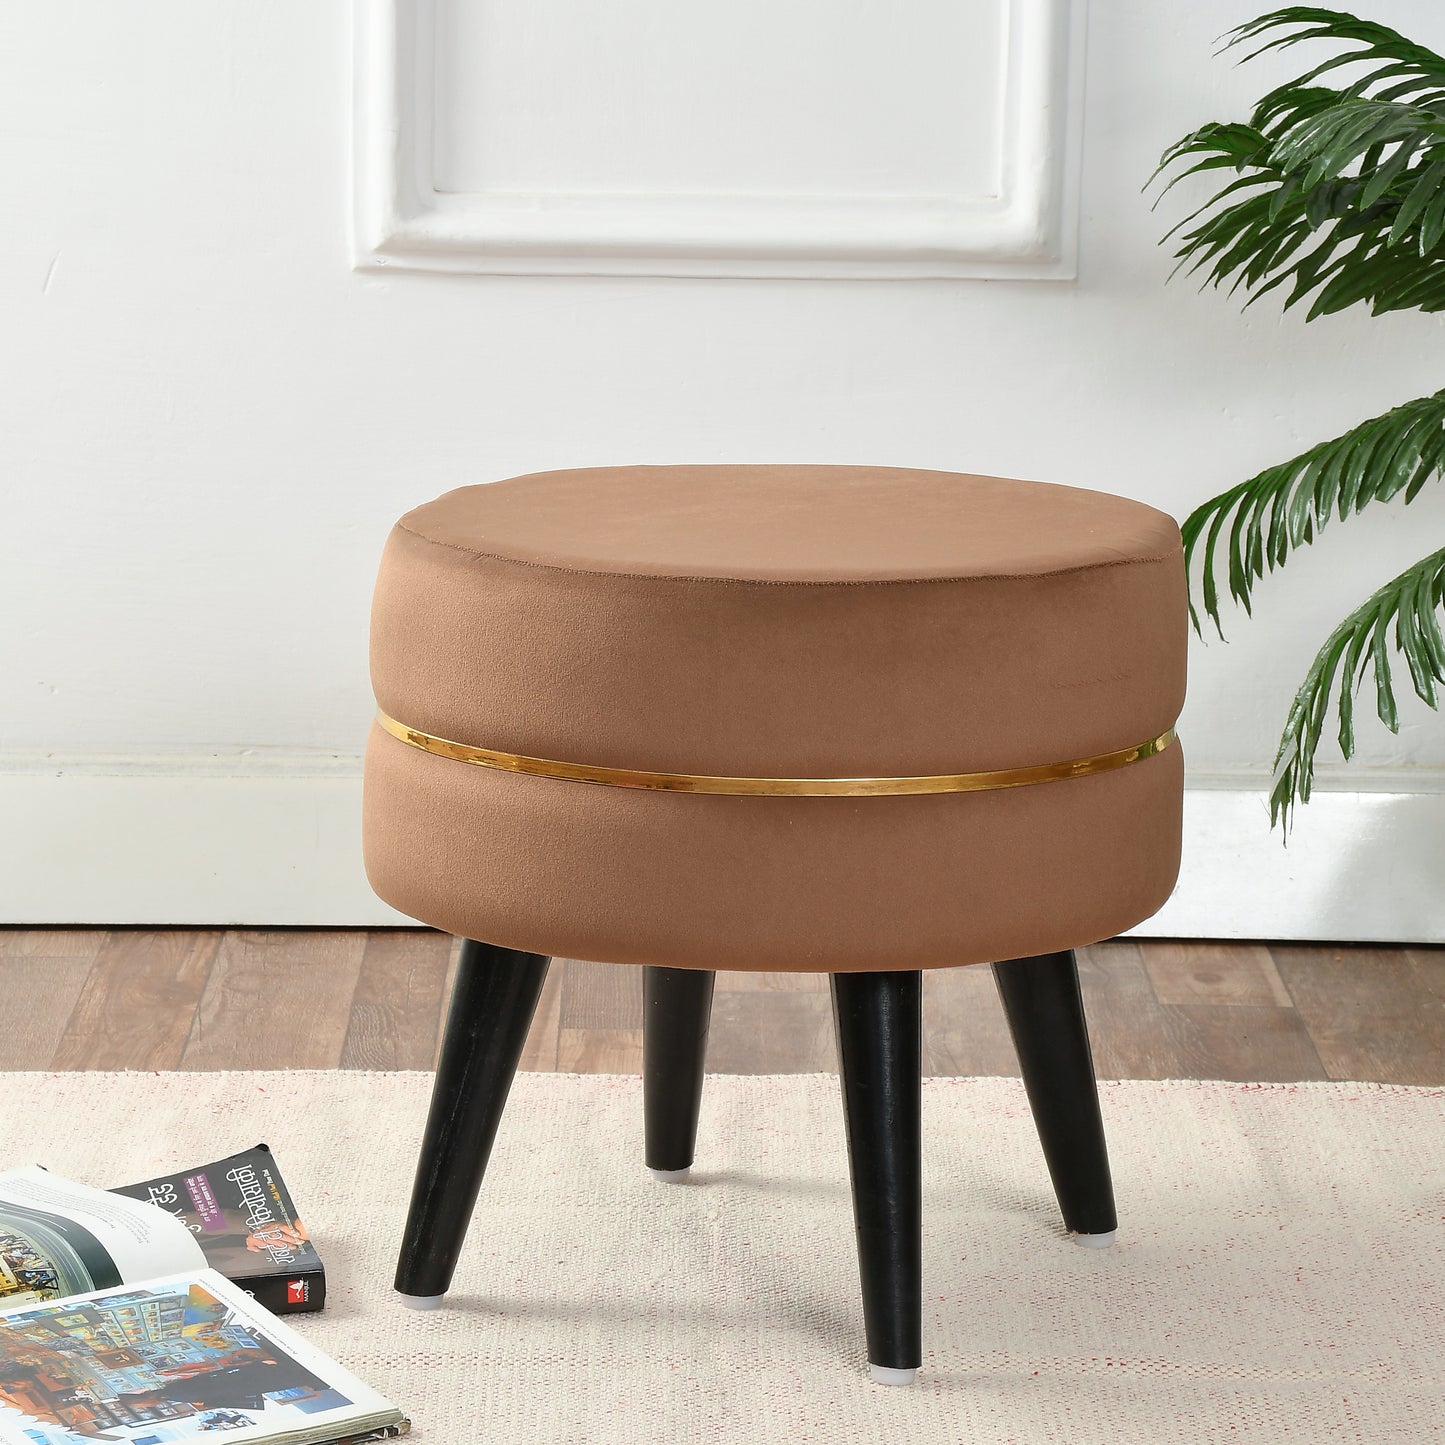 Homeaccex Ottoman Pouffe Puffy Stool, 16inch Height